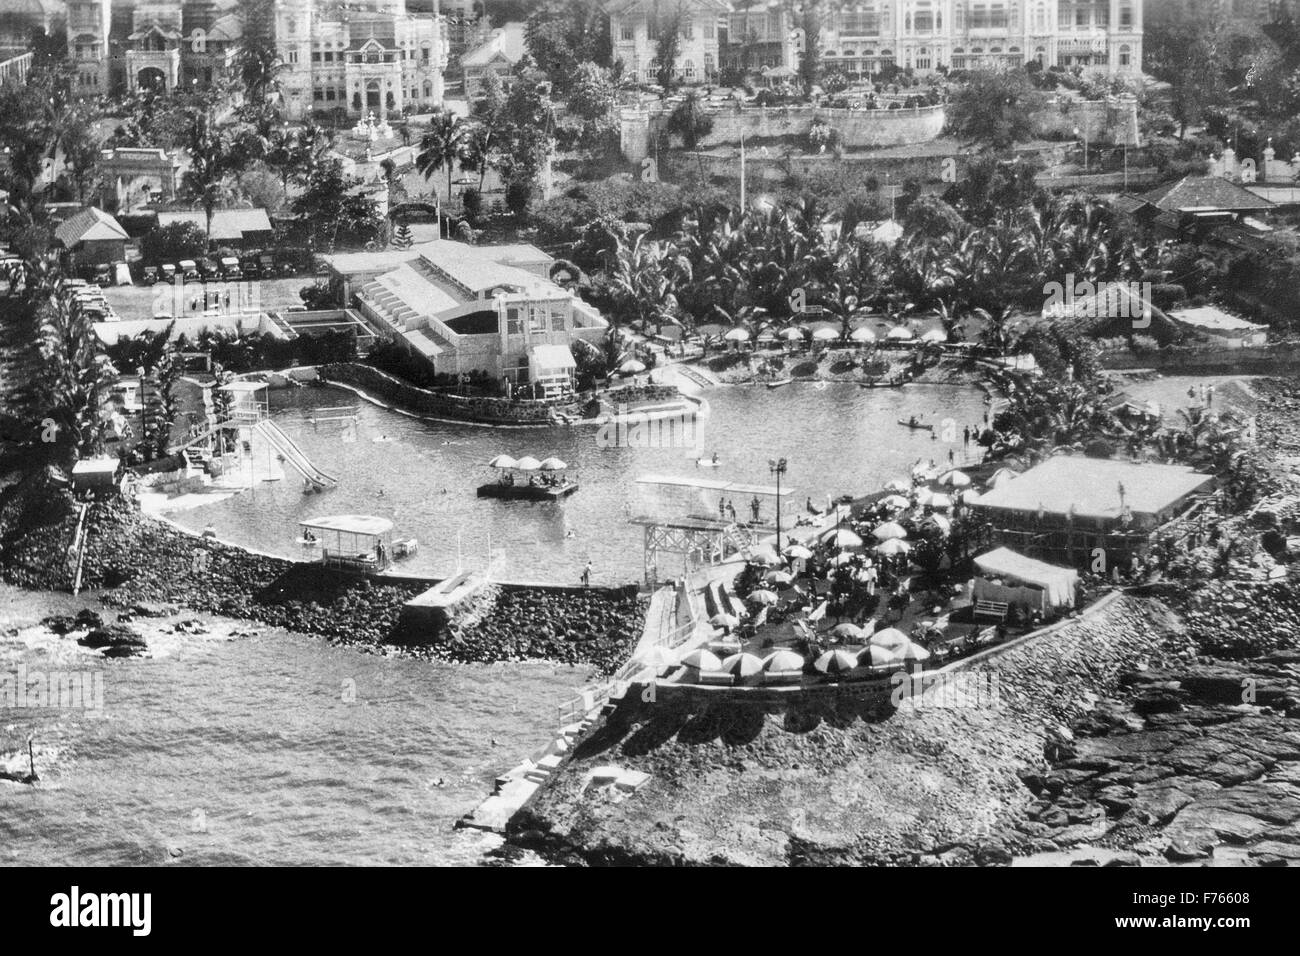 Breach Candy Club, aerial, Breach Candy Swimming Bath Trust, Breach Candy, Warden Road, Bhulabhai Desai Marg, Bombay, Mumbai, Maharashtra, India, Asia, old vintage 1900s picture Stock Photo